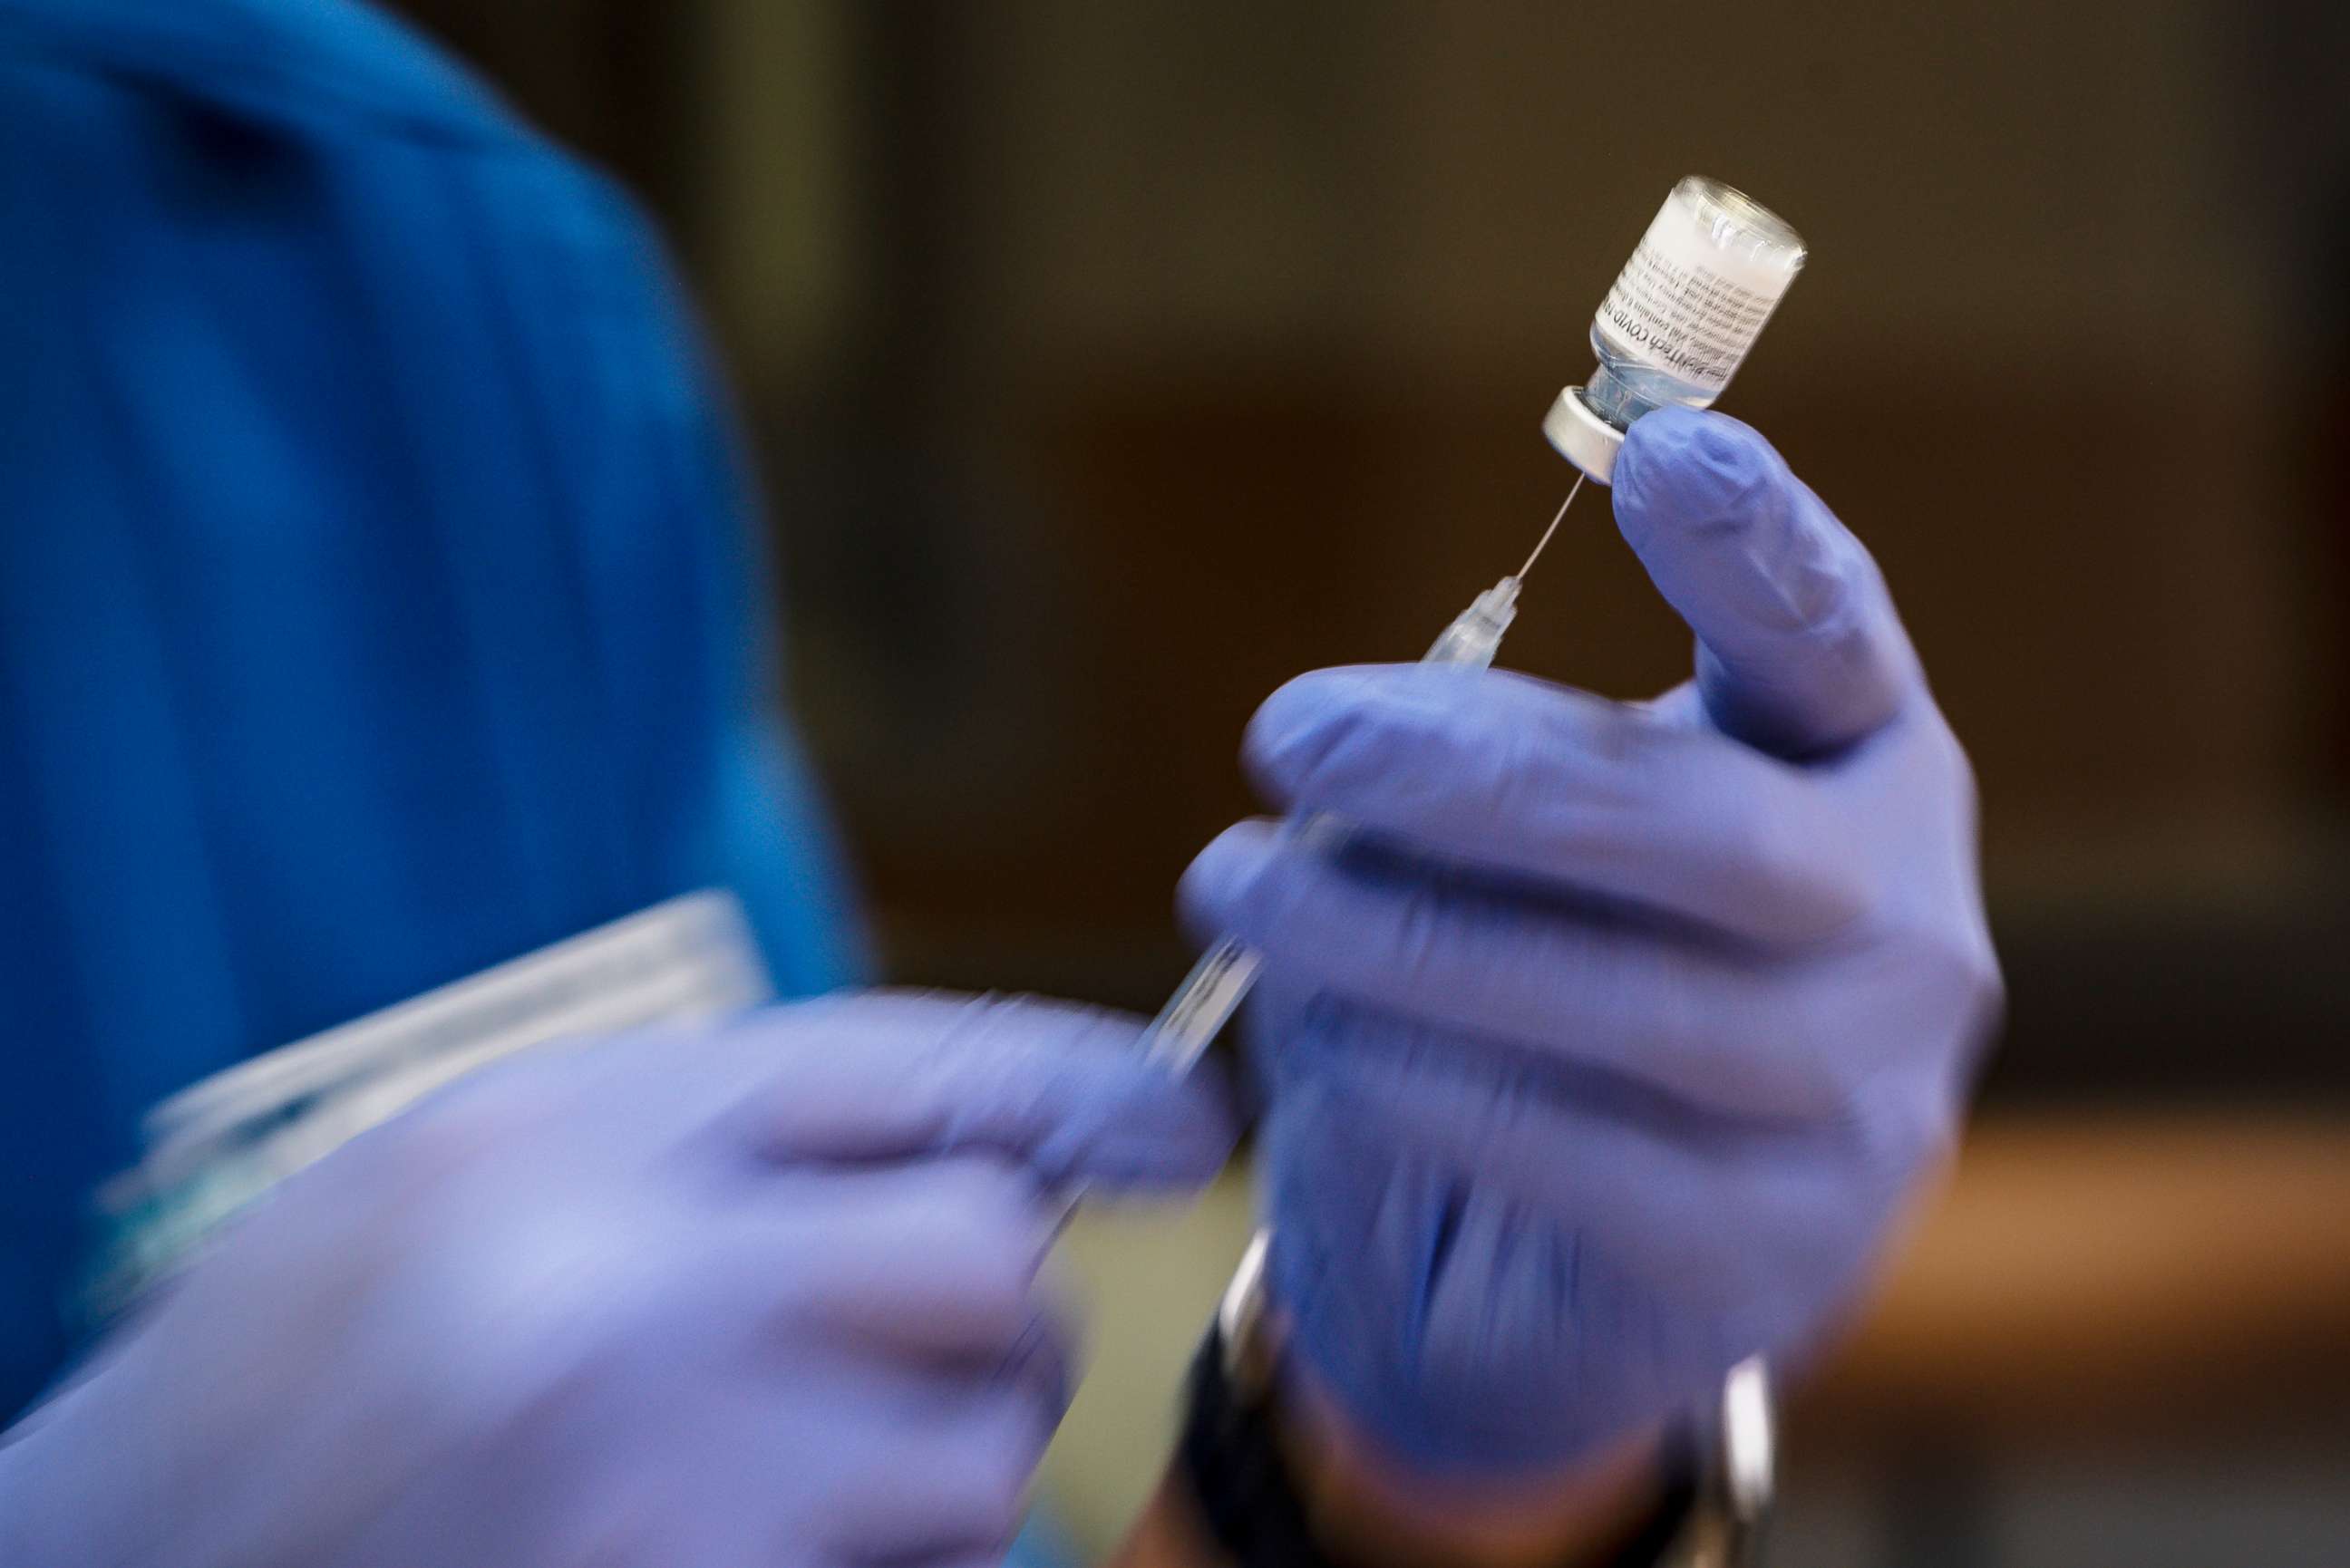 PHOTO: A nursing student prepares doses of the Pfizer COVID-19 vaccine for use in a vaccination clinic hosted by Odessa College, June 3, 2021 in Odessa, Texas.